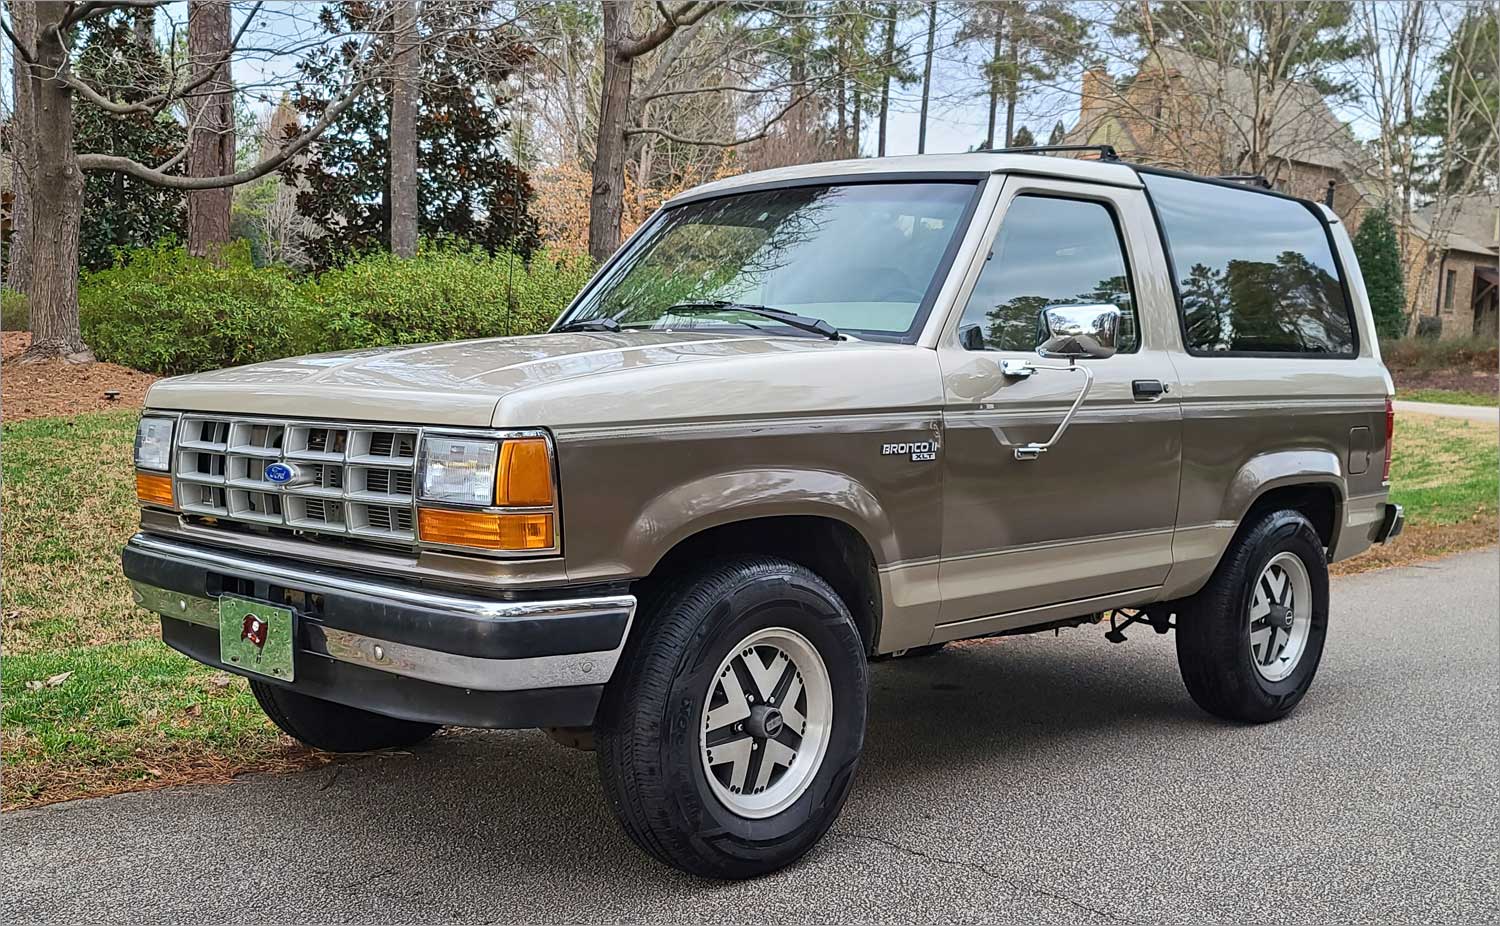 Dave's 1990 Ford Bronco II